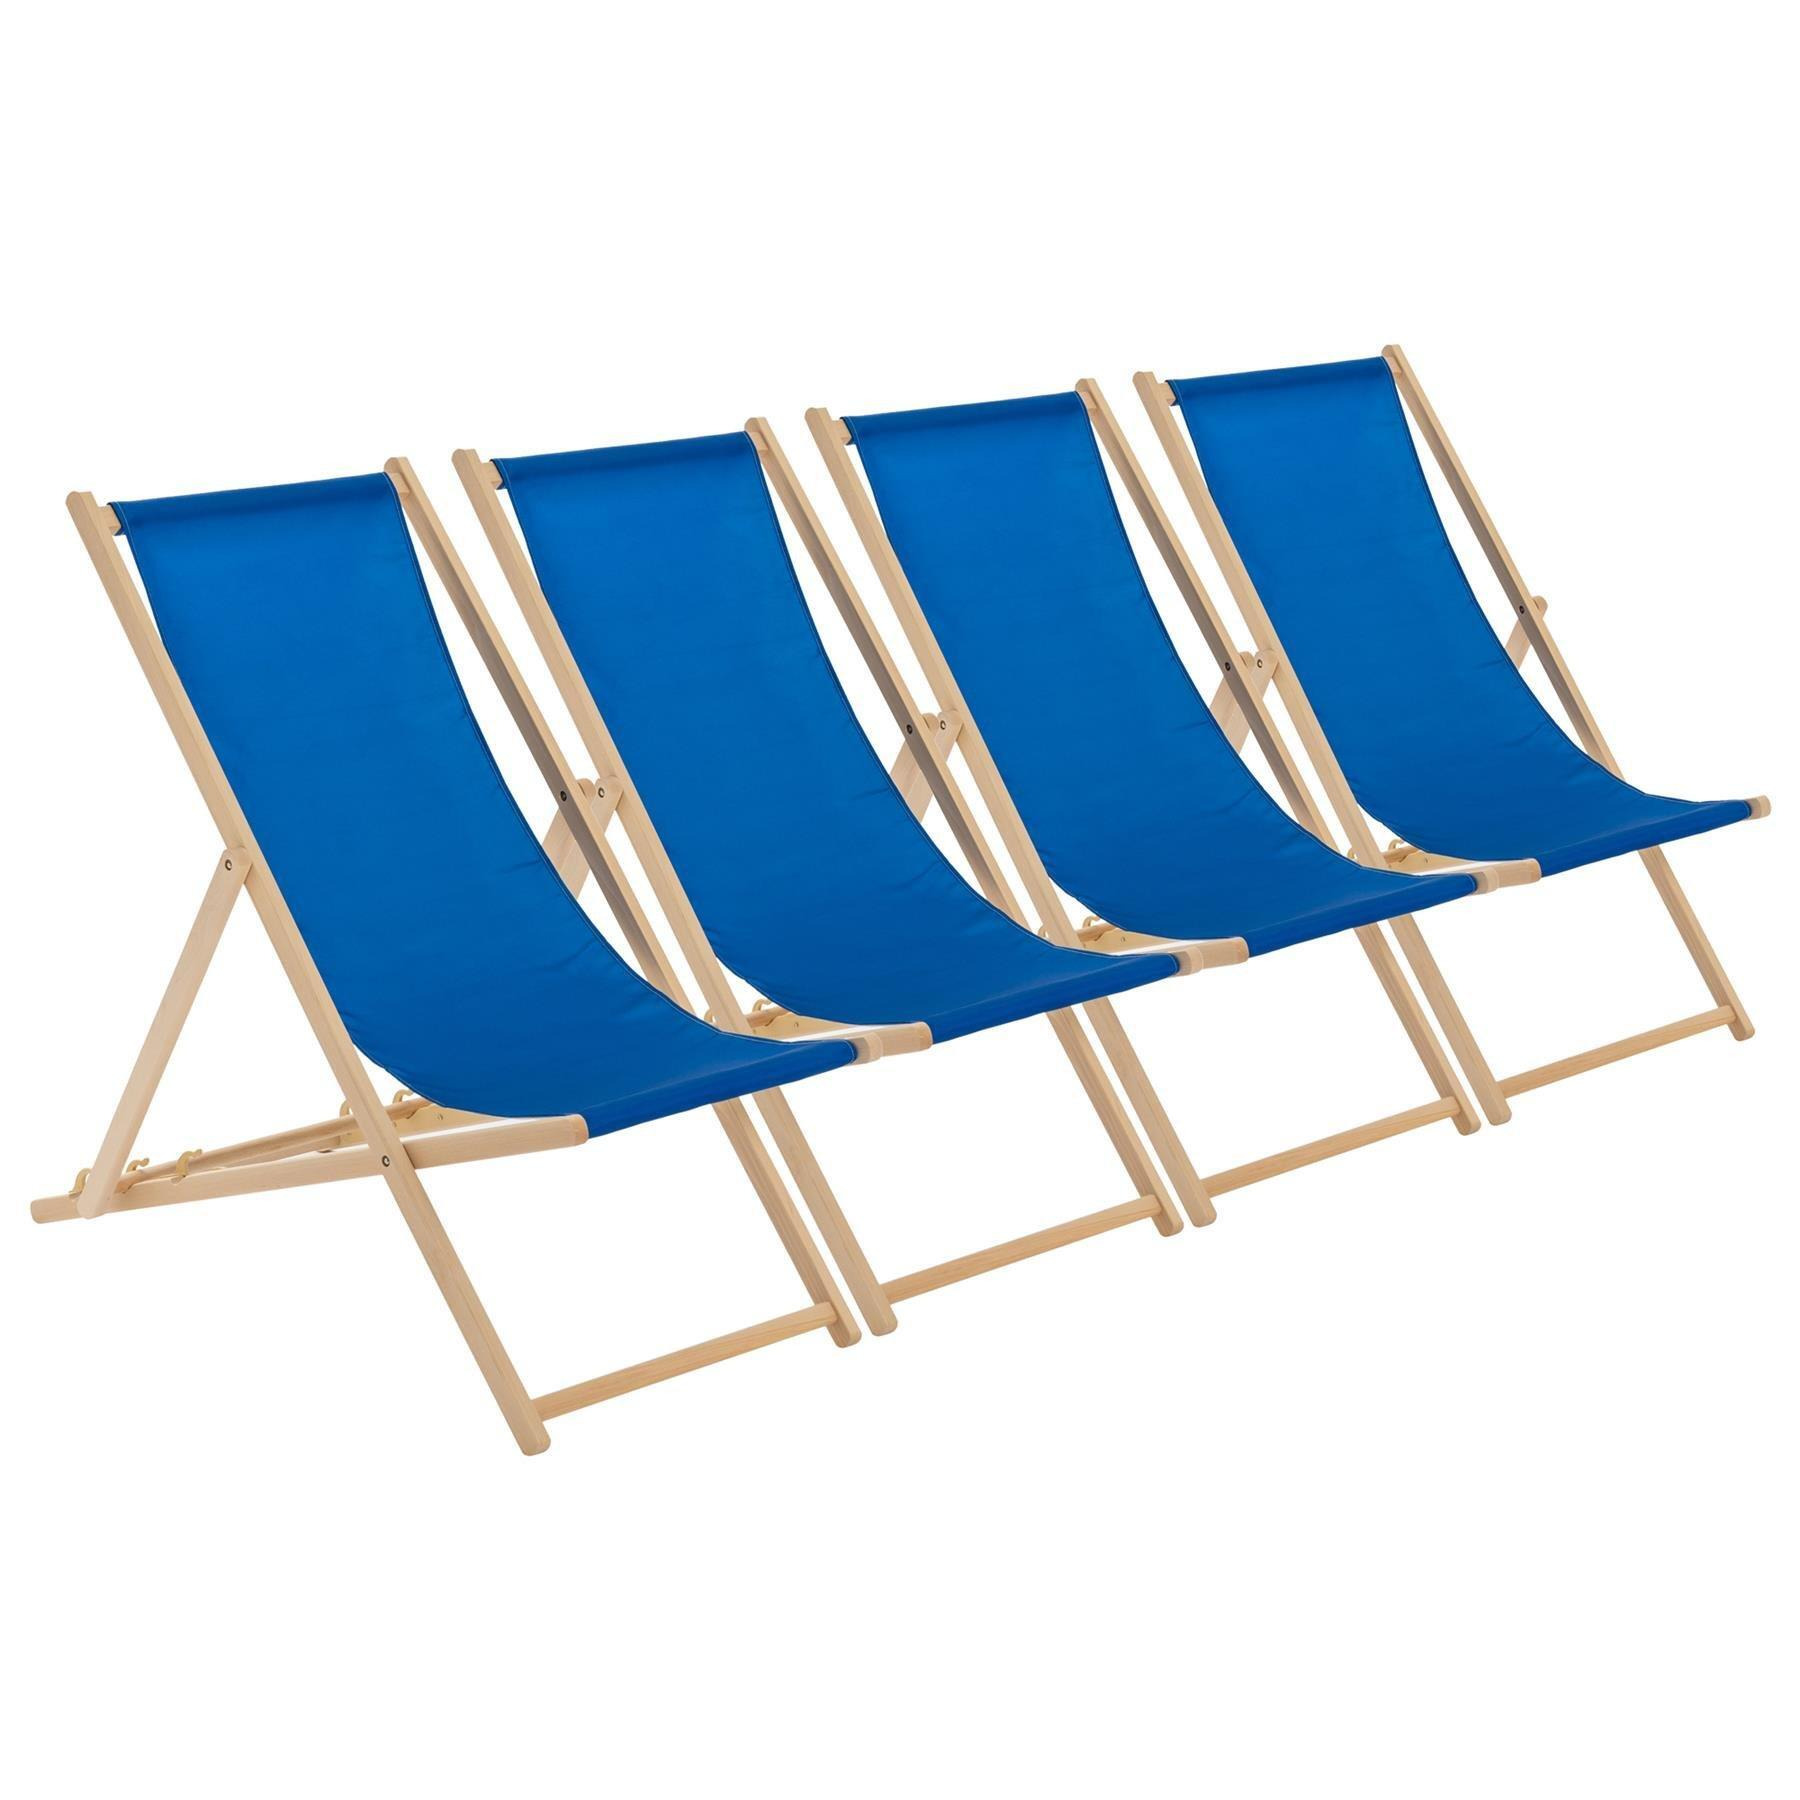 Folding Wooden Deck Chairs Blue Pack of 4 - image 1